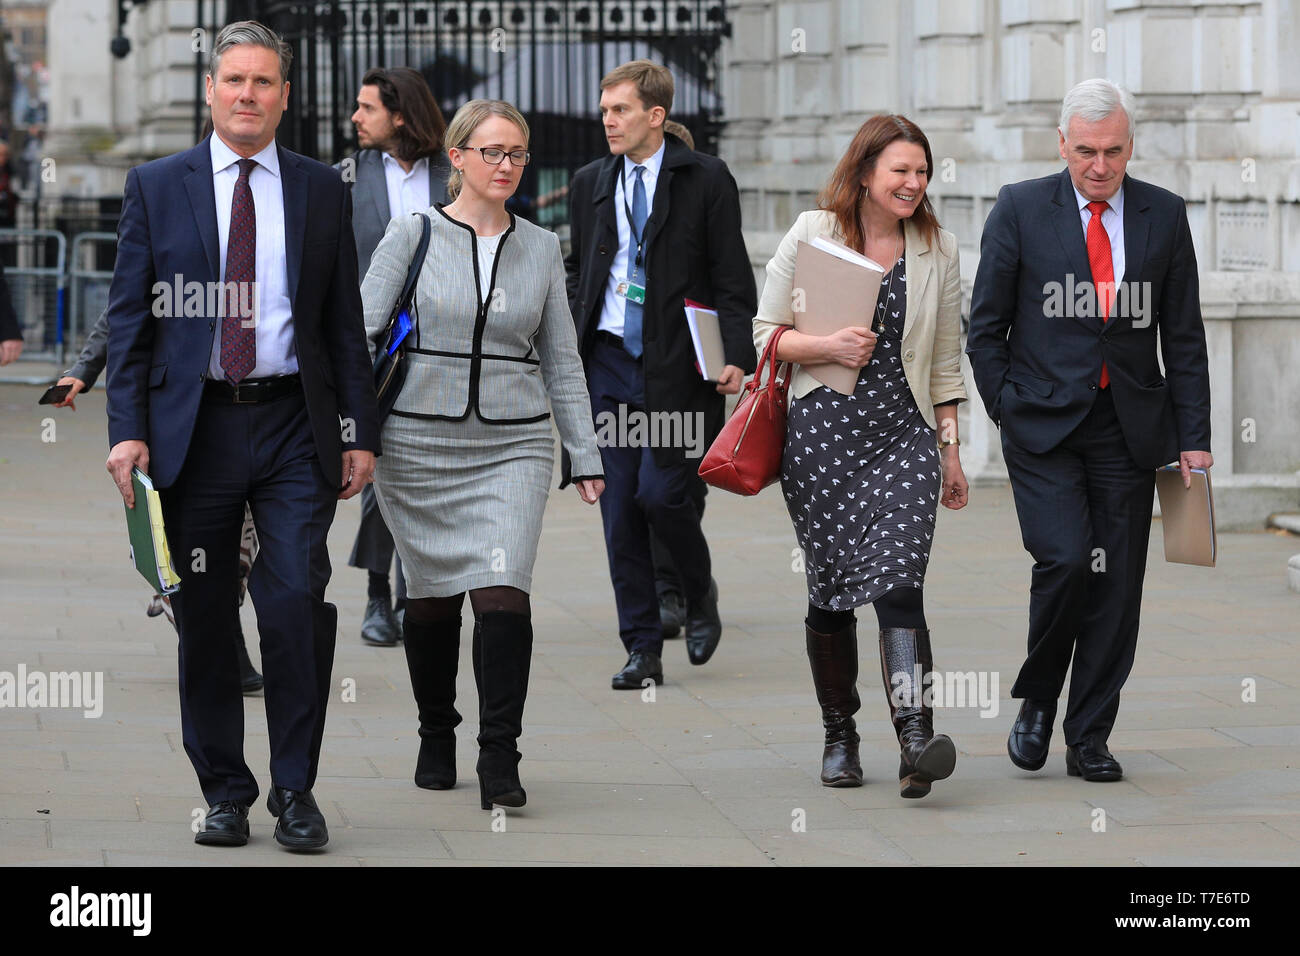 London, UK. 07th May, 2019. The Labour Party Brexit negotiating team on their way into the Cabinet Office in Westminster this afternoon. Left to right: Sir Keir Starmer, QC, MP, Shadow Secretary of State for Exiting the European Union, Shadow Business Secretary Rebecca Long-Bailey, MP, Shadow Environment Secretary Sue Hayman, MP, and John McDonnell, MP, Shadow Chancellor. Credit: Imageplotter/Alamy Live News Stock Photo